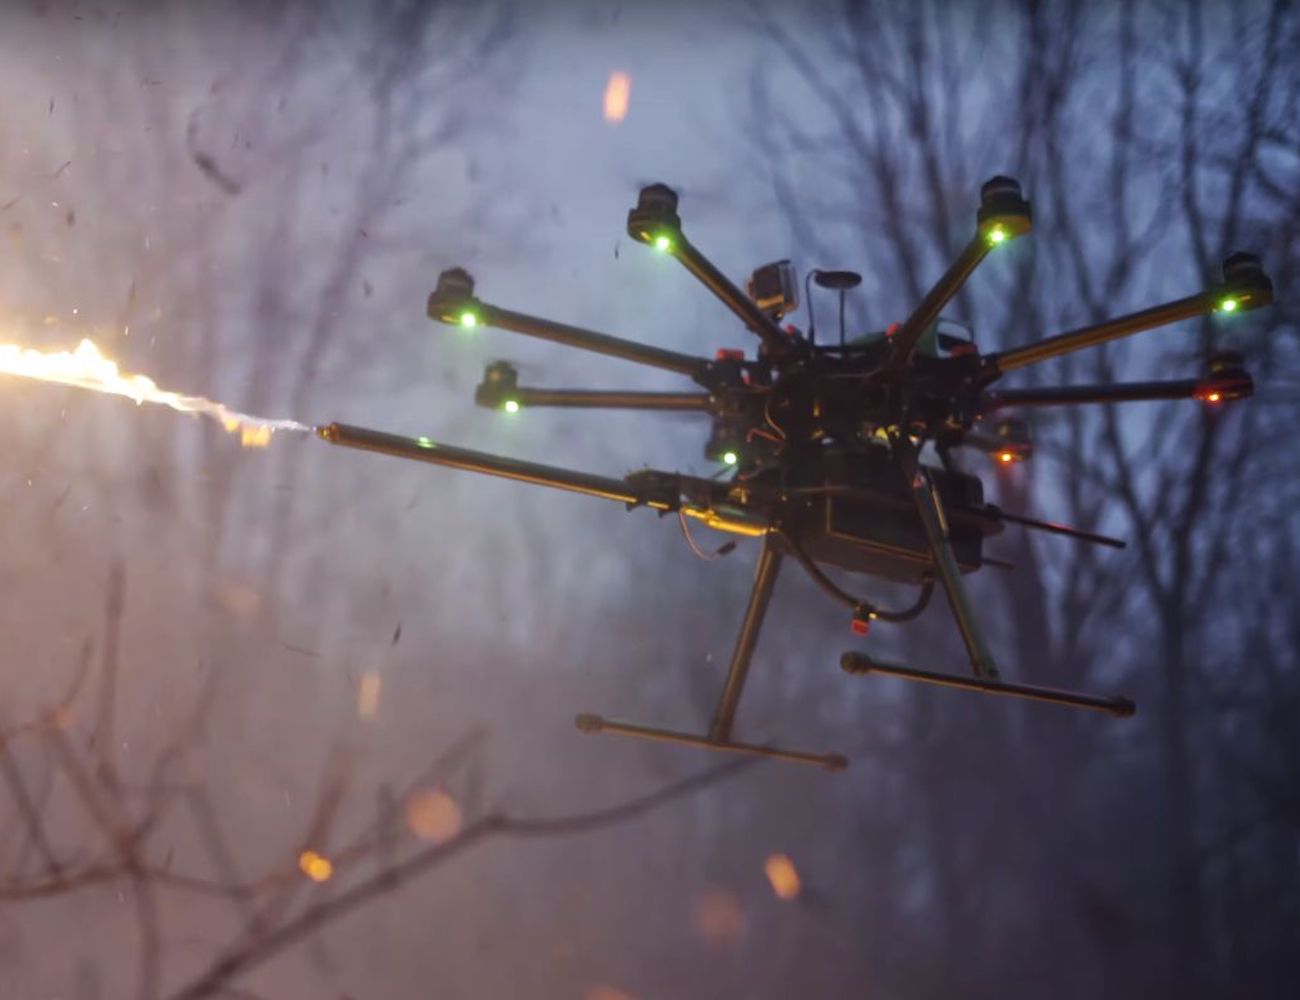 Throwflame TF-19 WASP Drone Flamethrower Attachment remotely ignites your target